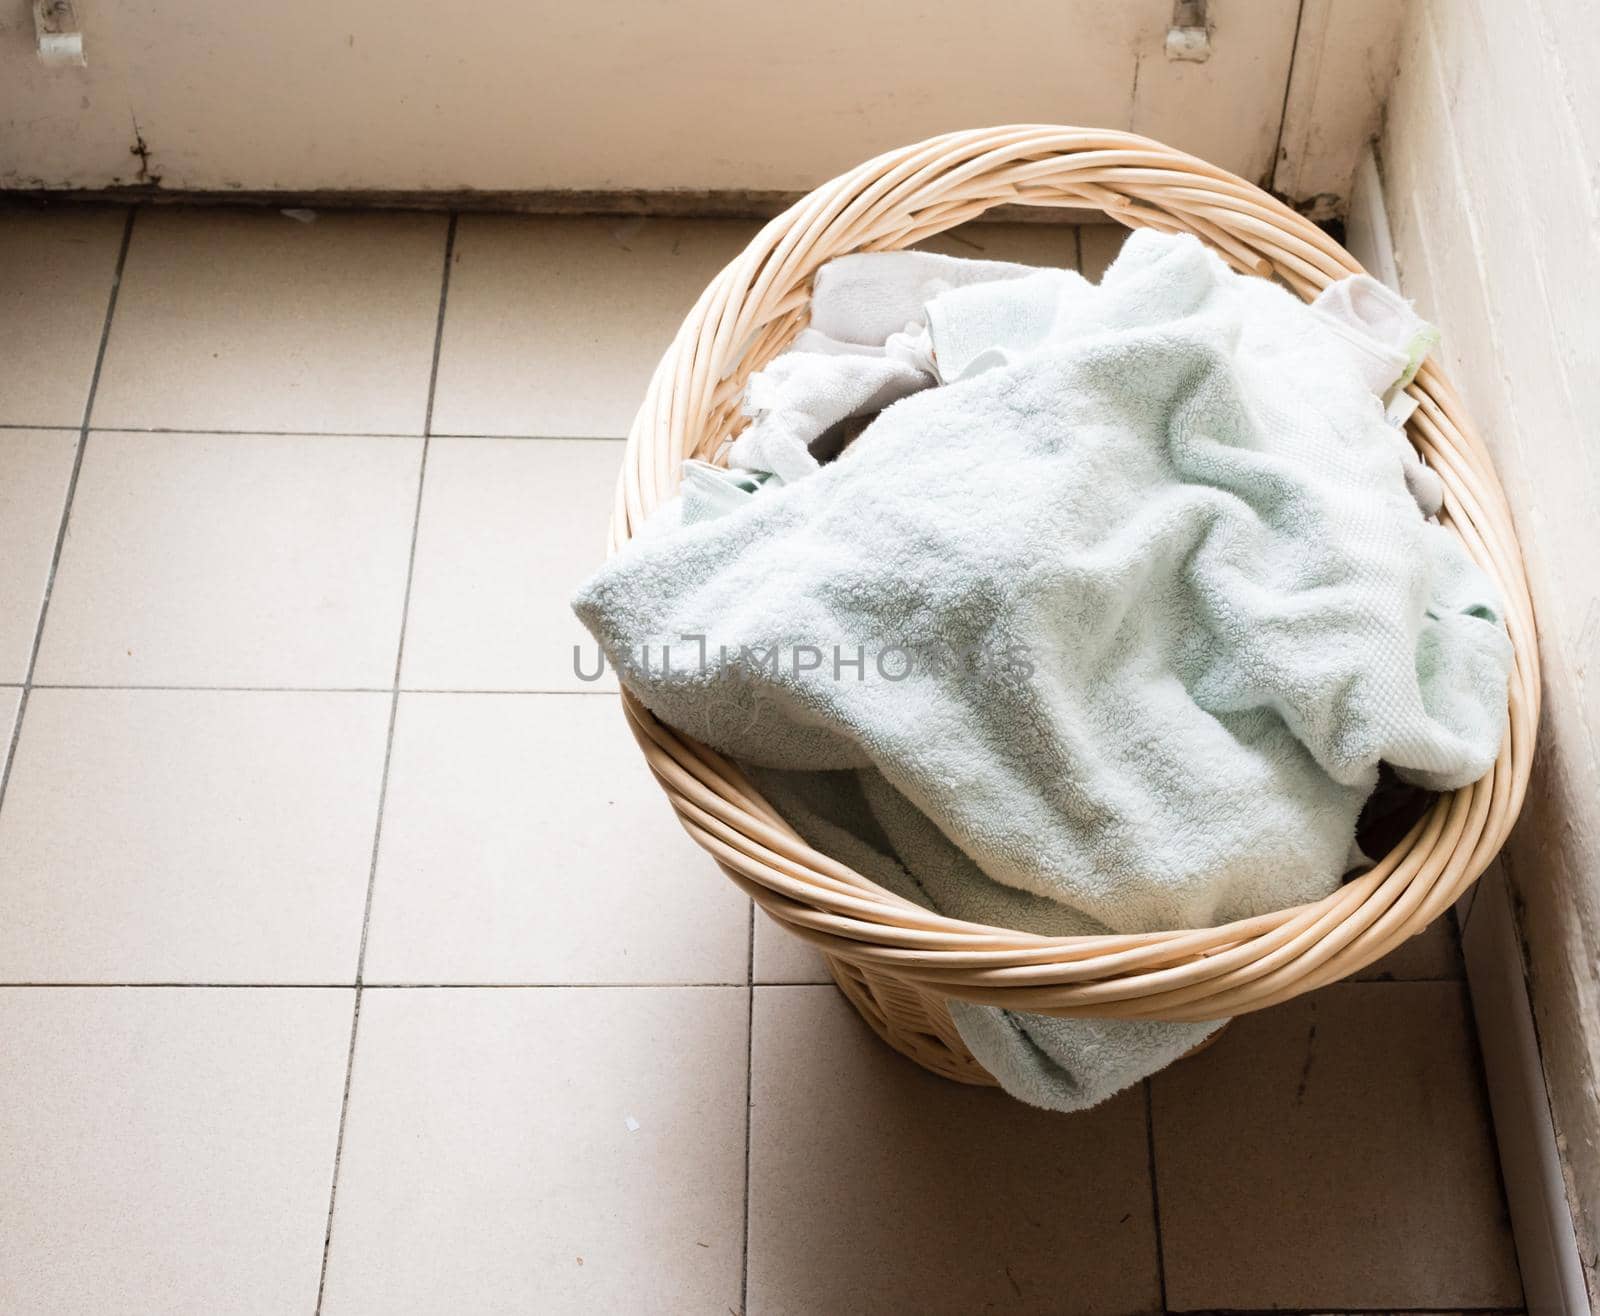 High angle view of towels in wicker laundry basket on rustic tiled floor (selective focus)